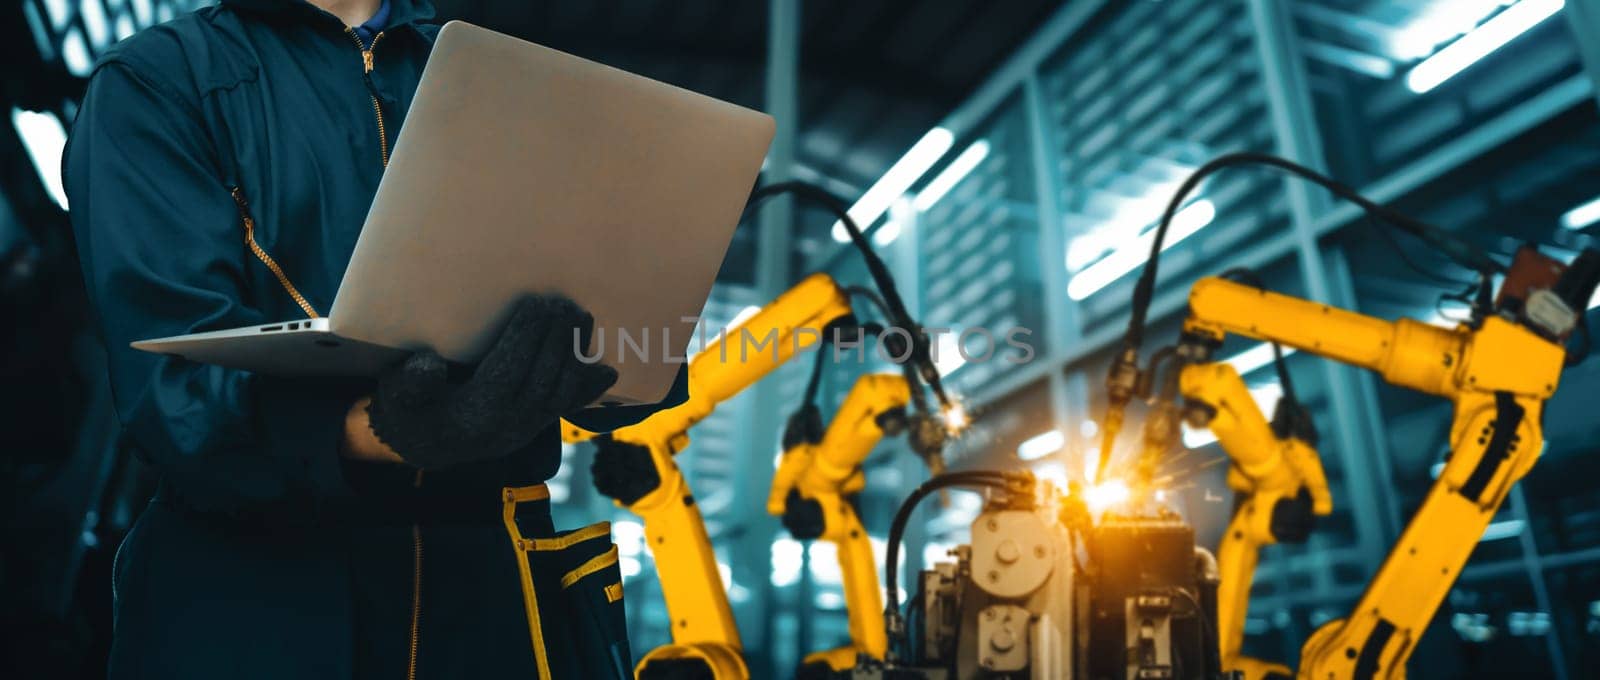 MLB Engineer use advanced robotic software to control industry robot arm in factory. Automation manufacturing process controlled by specialist using IOT software connected to internet network.